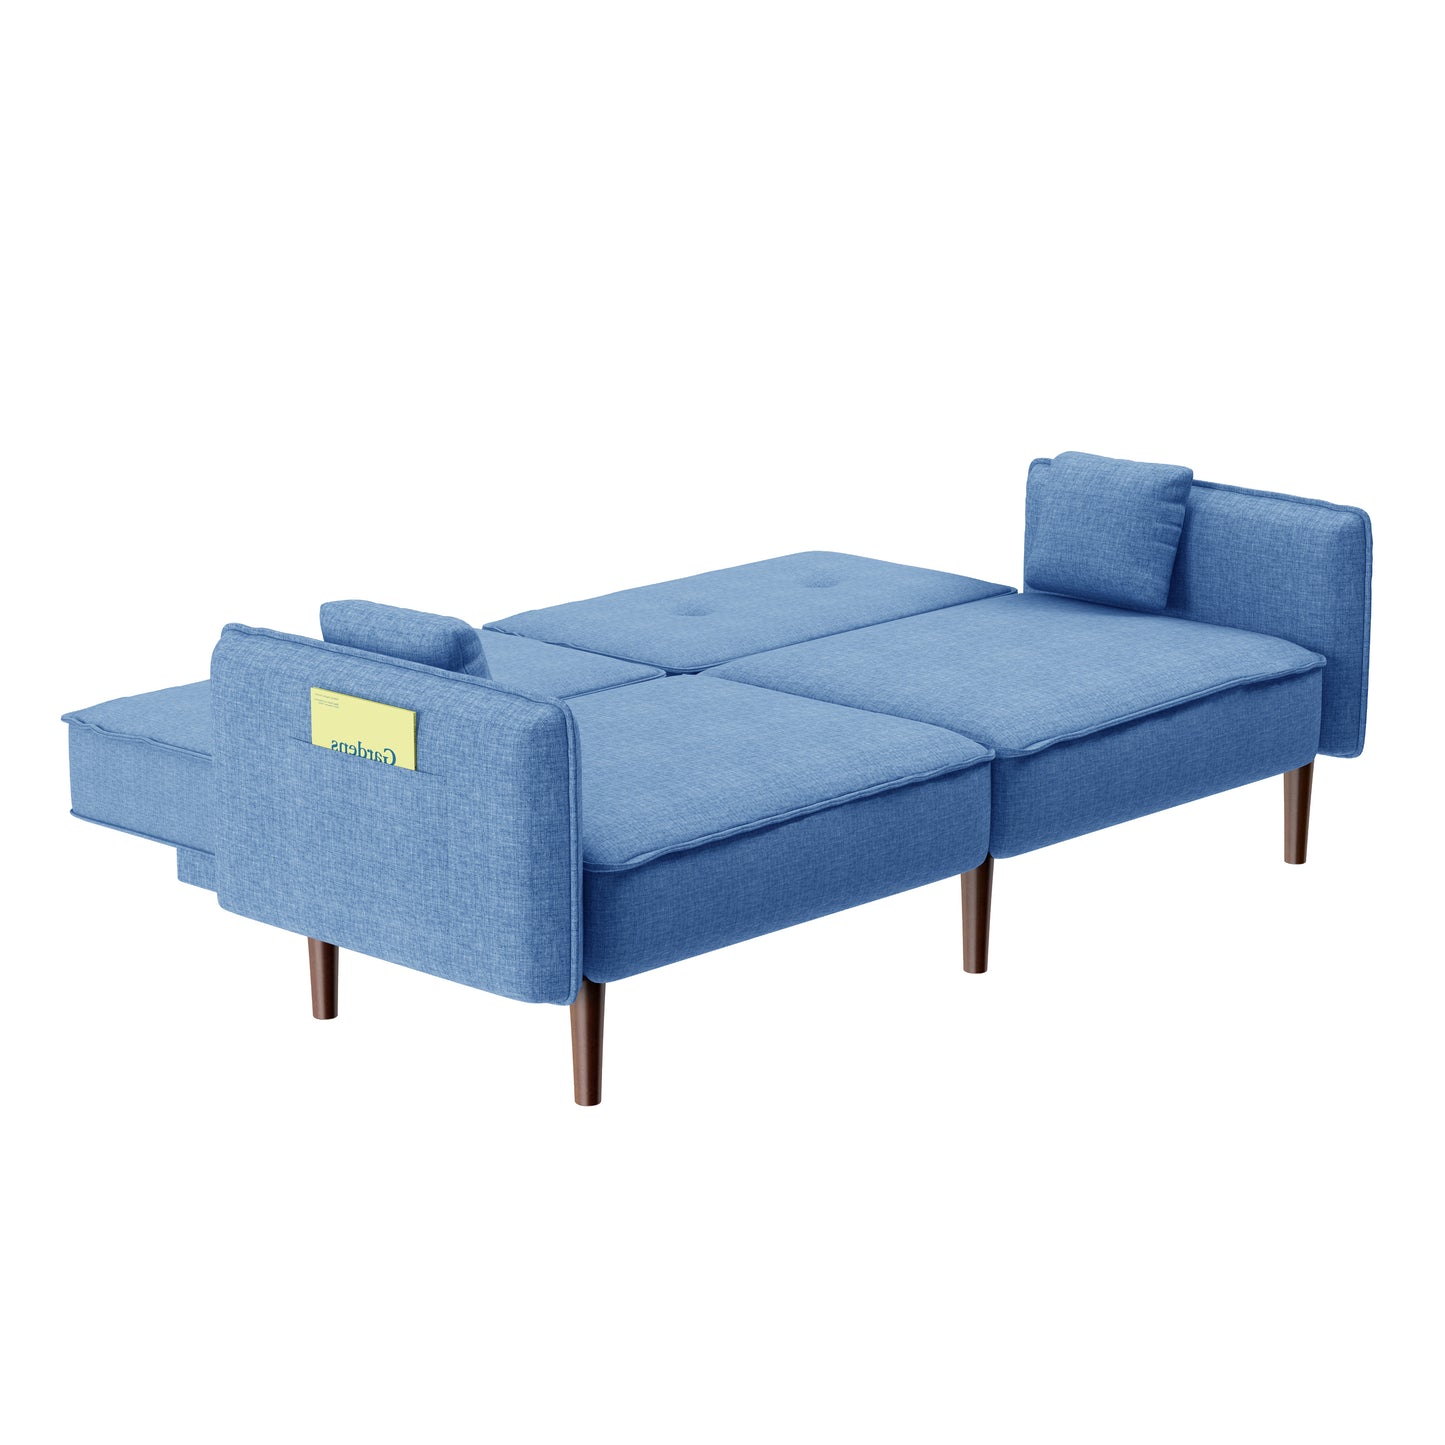 Living Room Leisure Futon Sofa bed in Blue Fabric